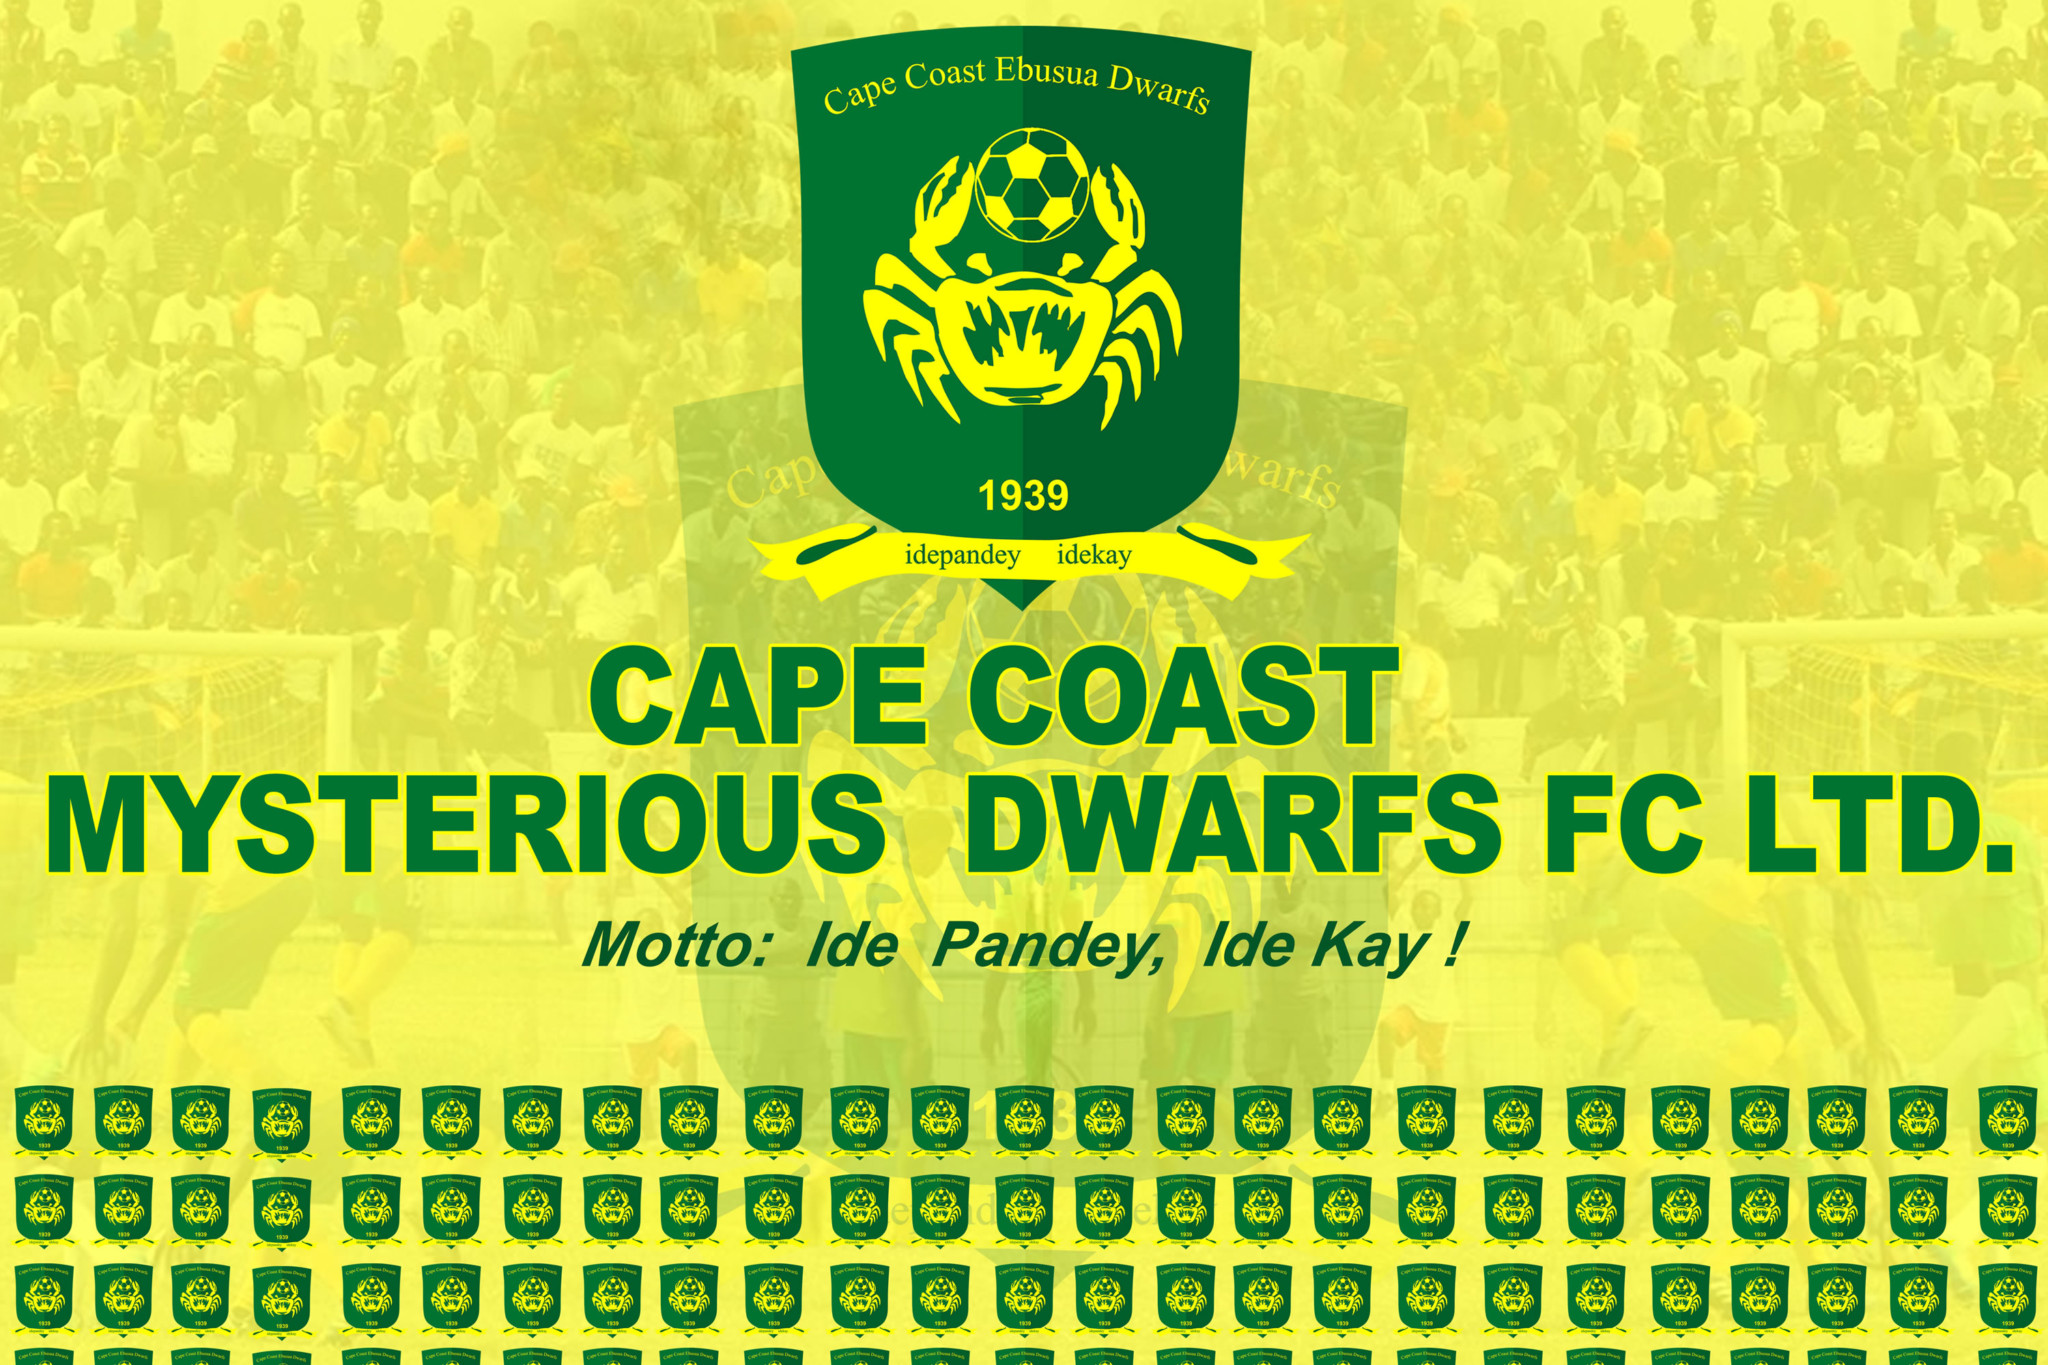 Injured Dwarfs player ruled-out for 6 weeks